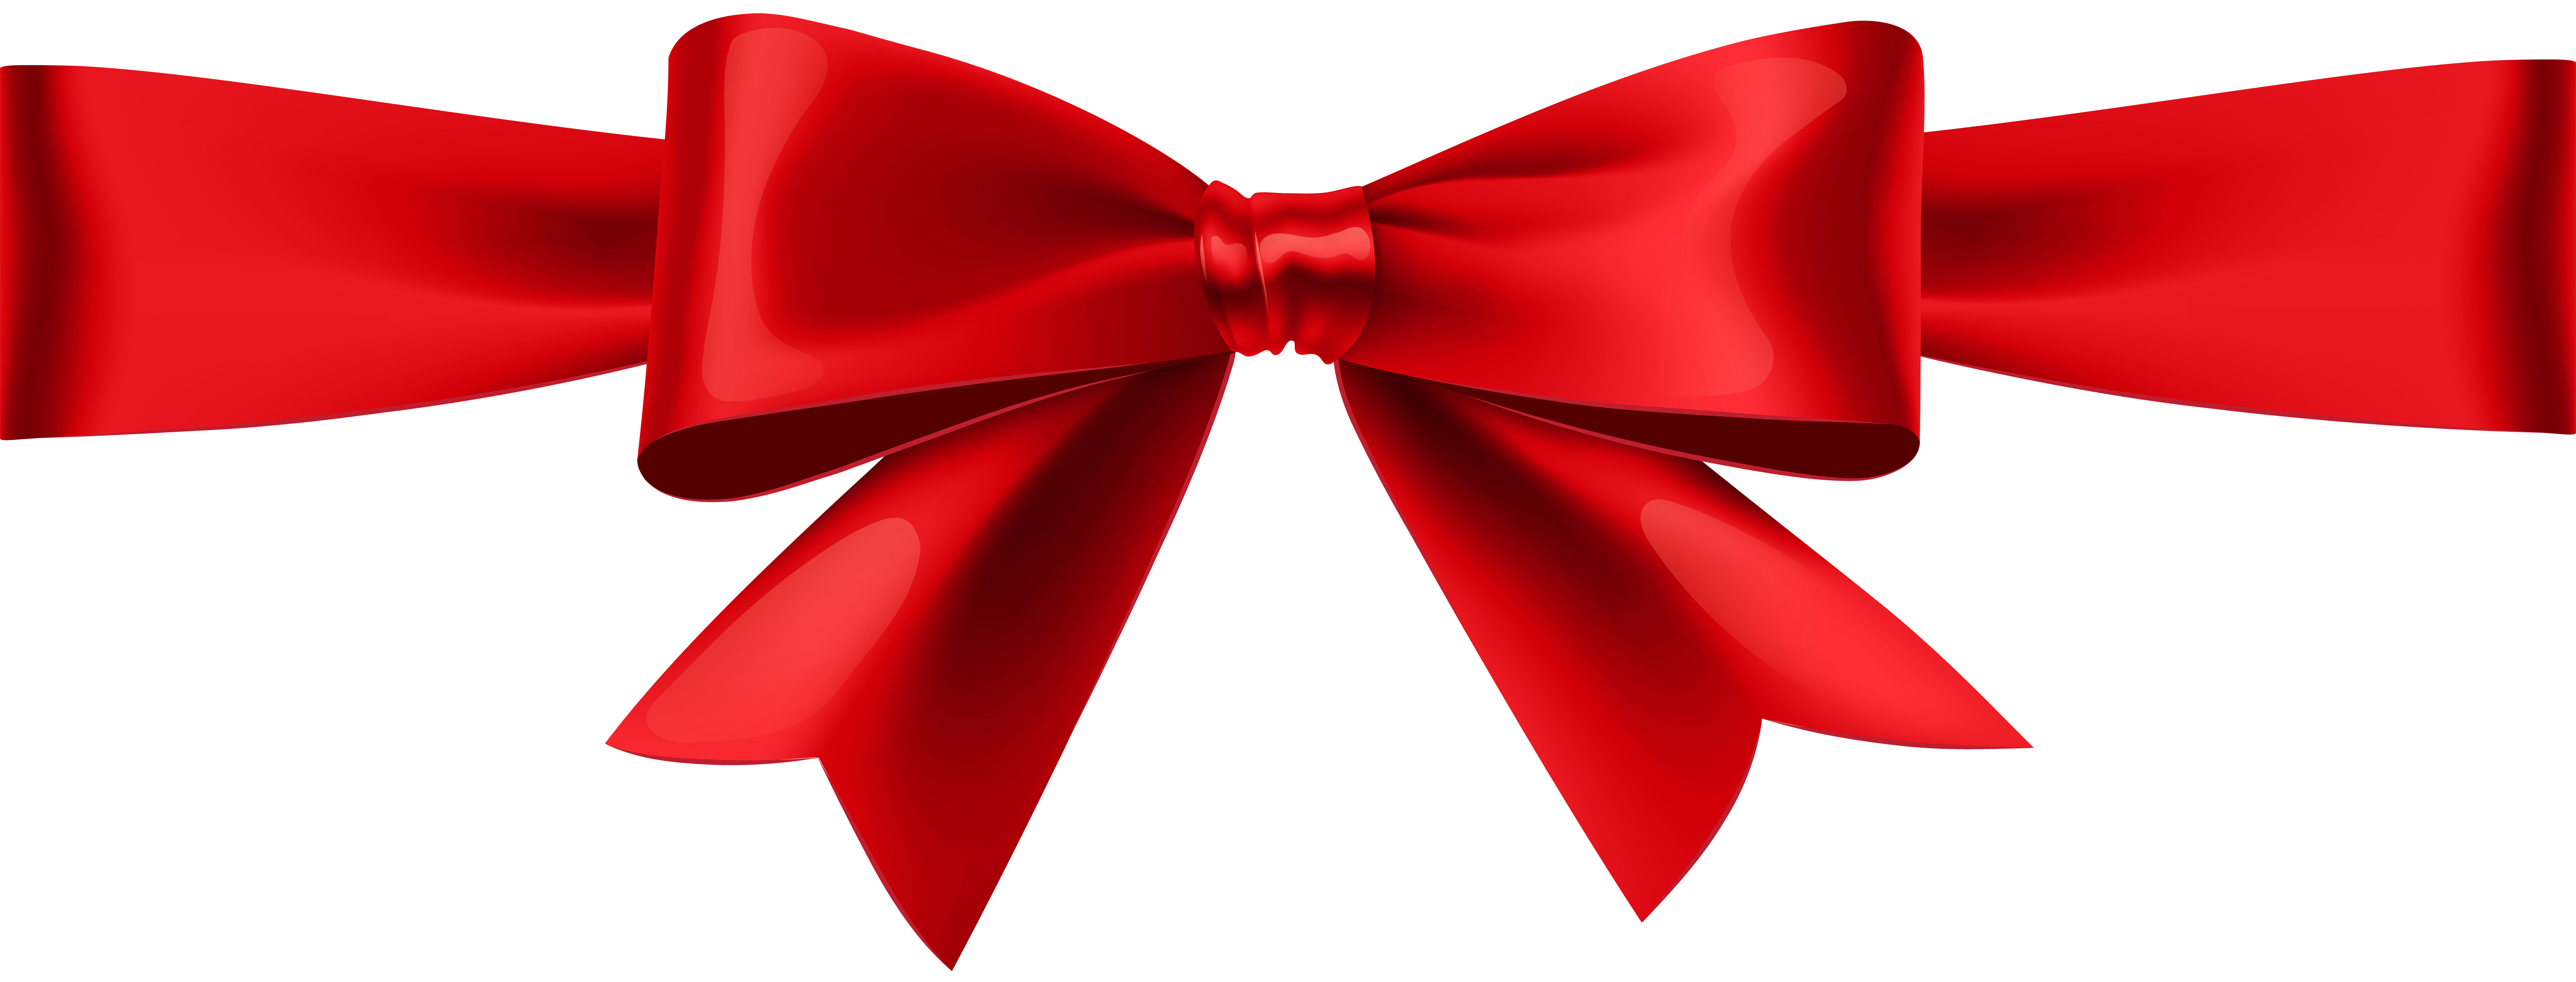 Red Bow Transparent PNG Image​